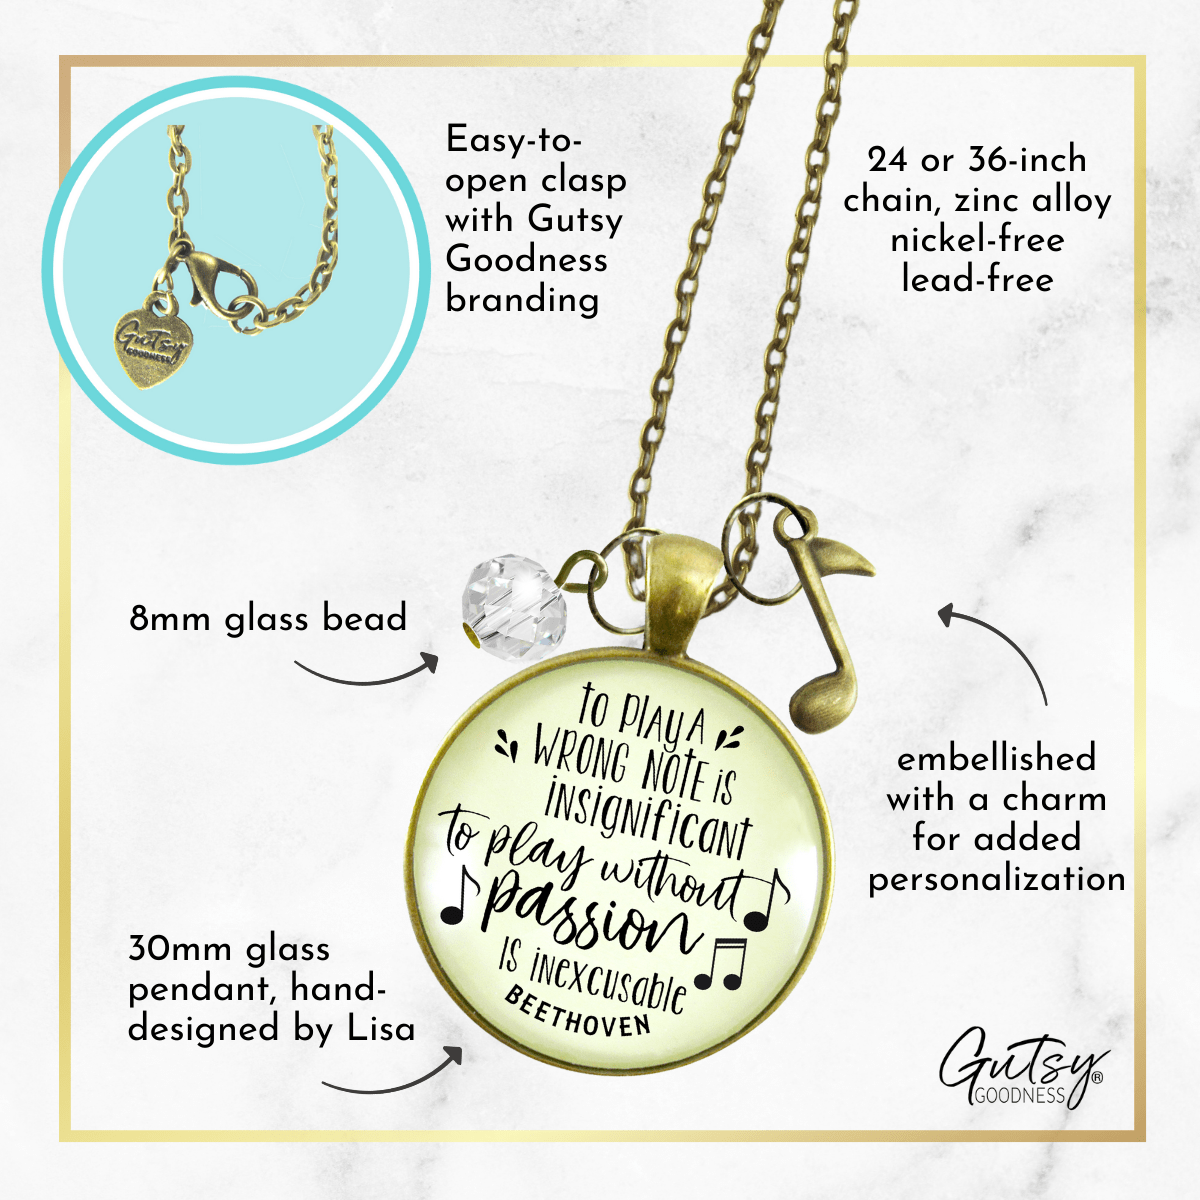 Gutsy Goodness Music Note Necklace To Play Wrong Note Beethoven Quote Teacher Gift - Gutsy Goodness Handmade Jewelry;Music Note Necklace To Play Wrong Note Beethoven Quote Teacher Gift - Gutsy Goodness Handmade Jewelry Gifts